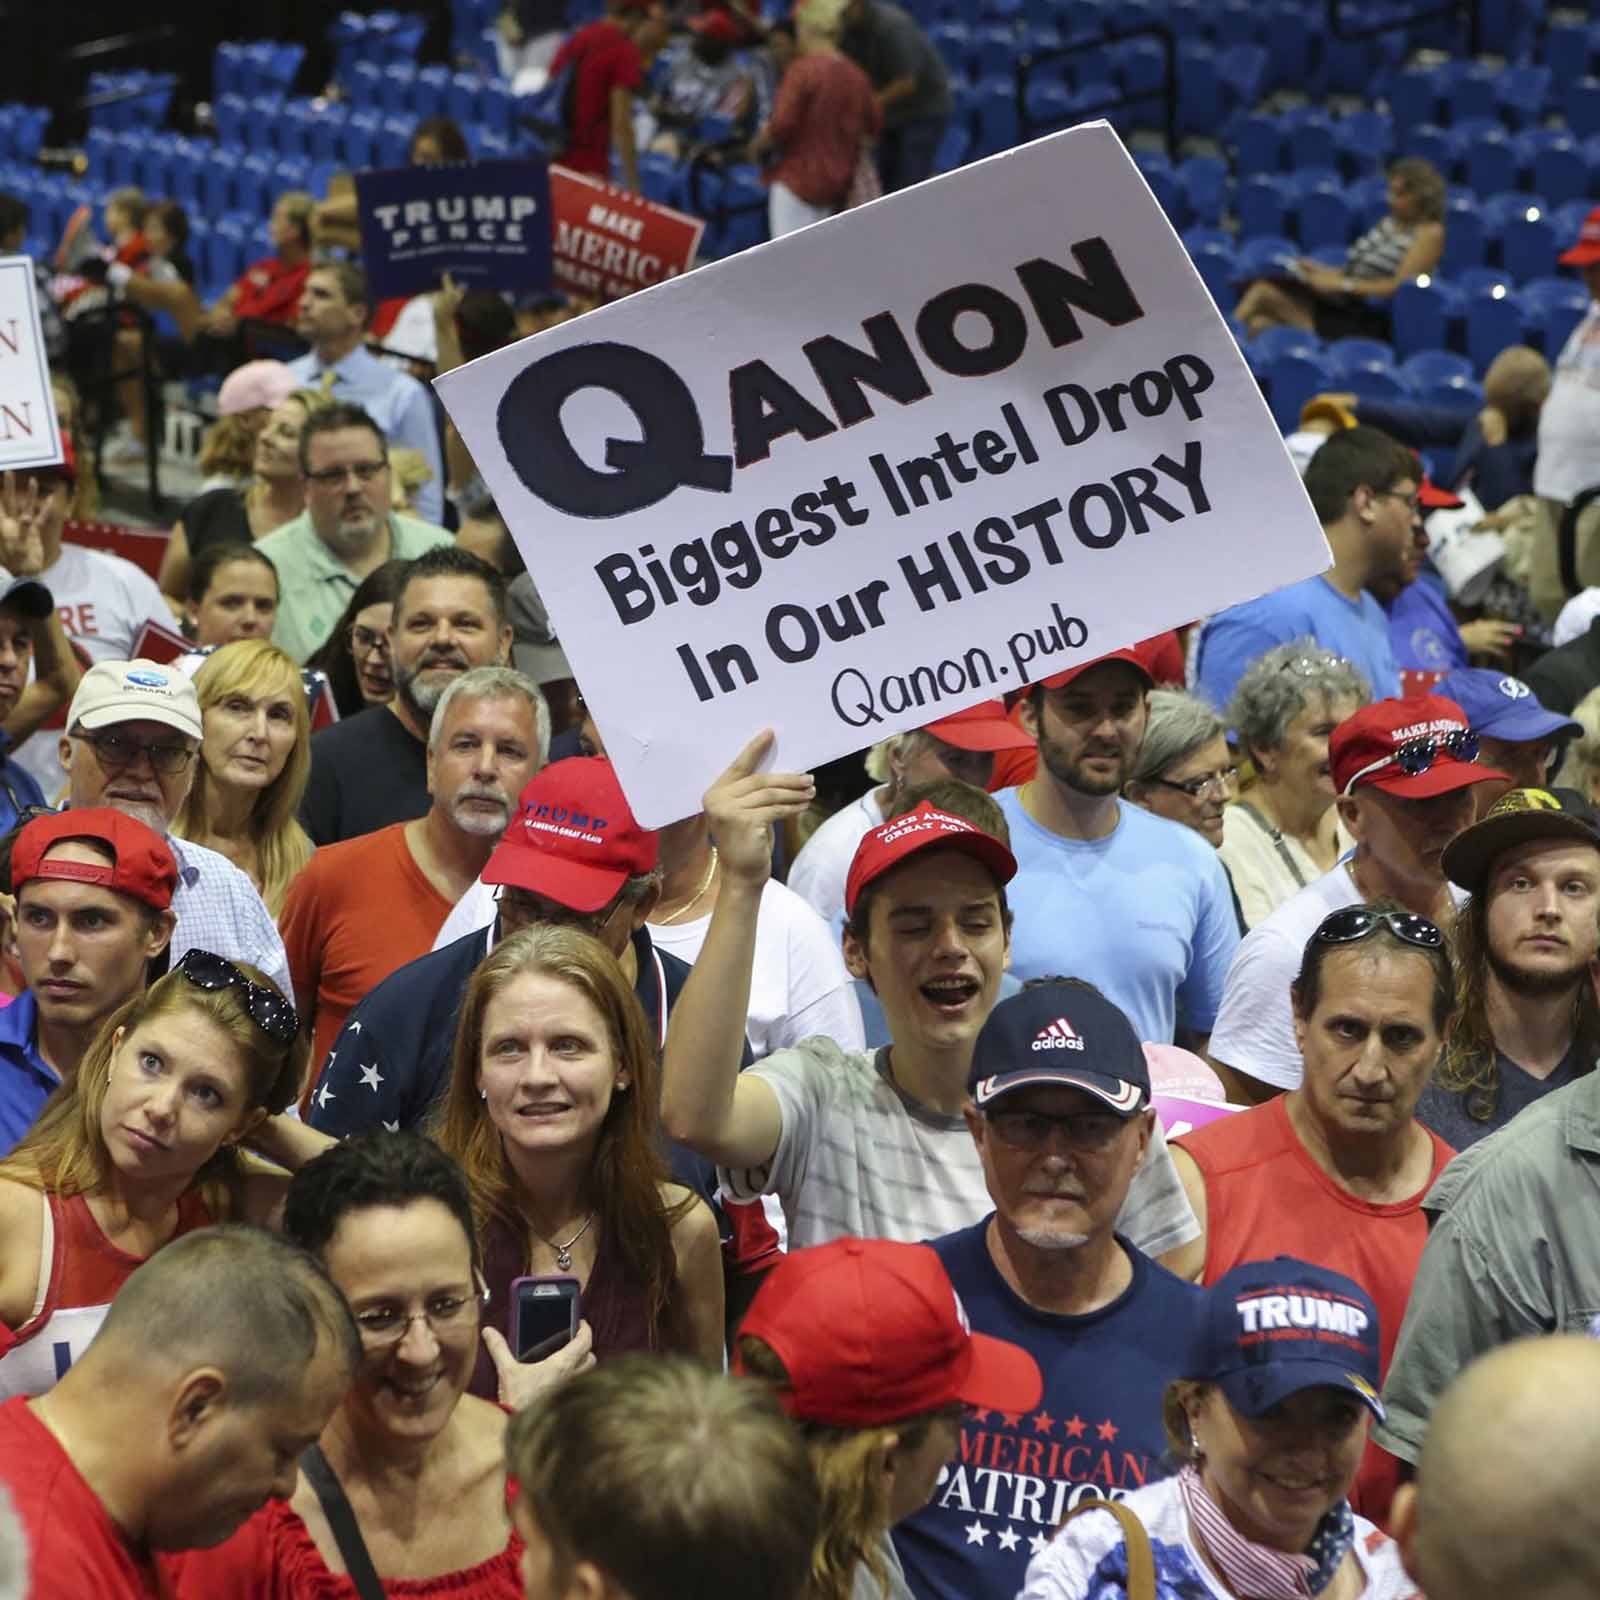 The FBI has declared this group domestic terrorists, but what has QAnon done with their posts to warrant such a ranking? Here's a quick guide.